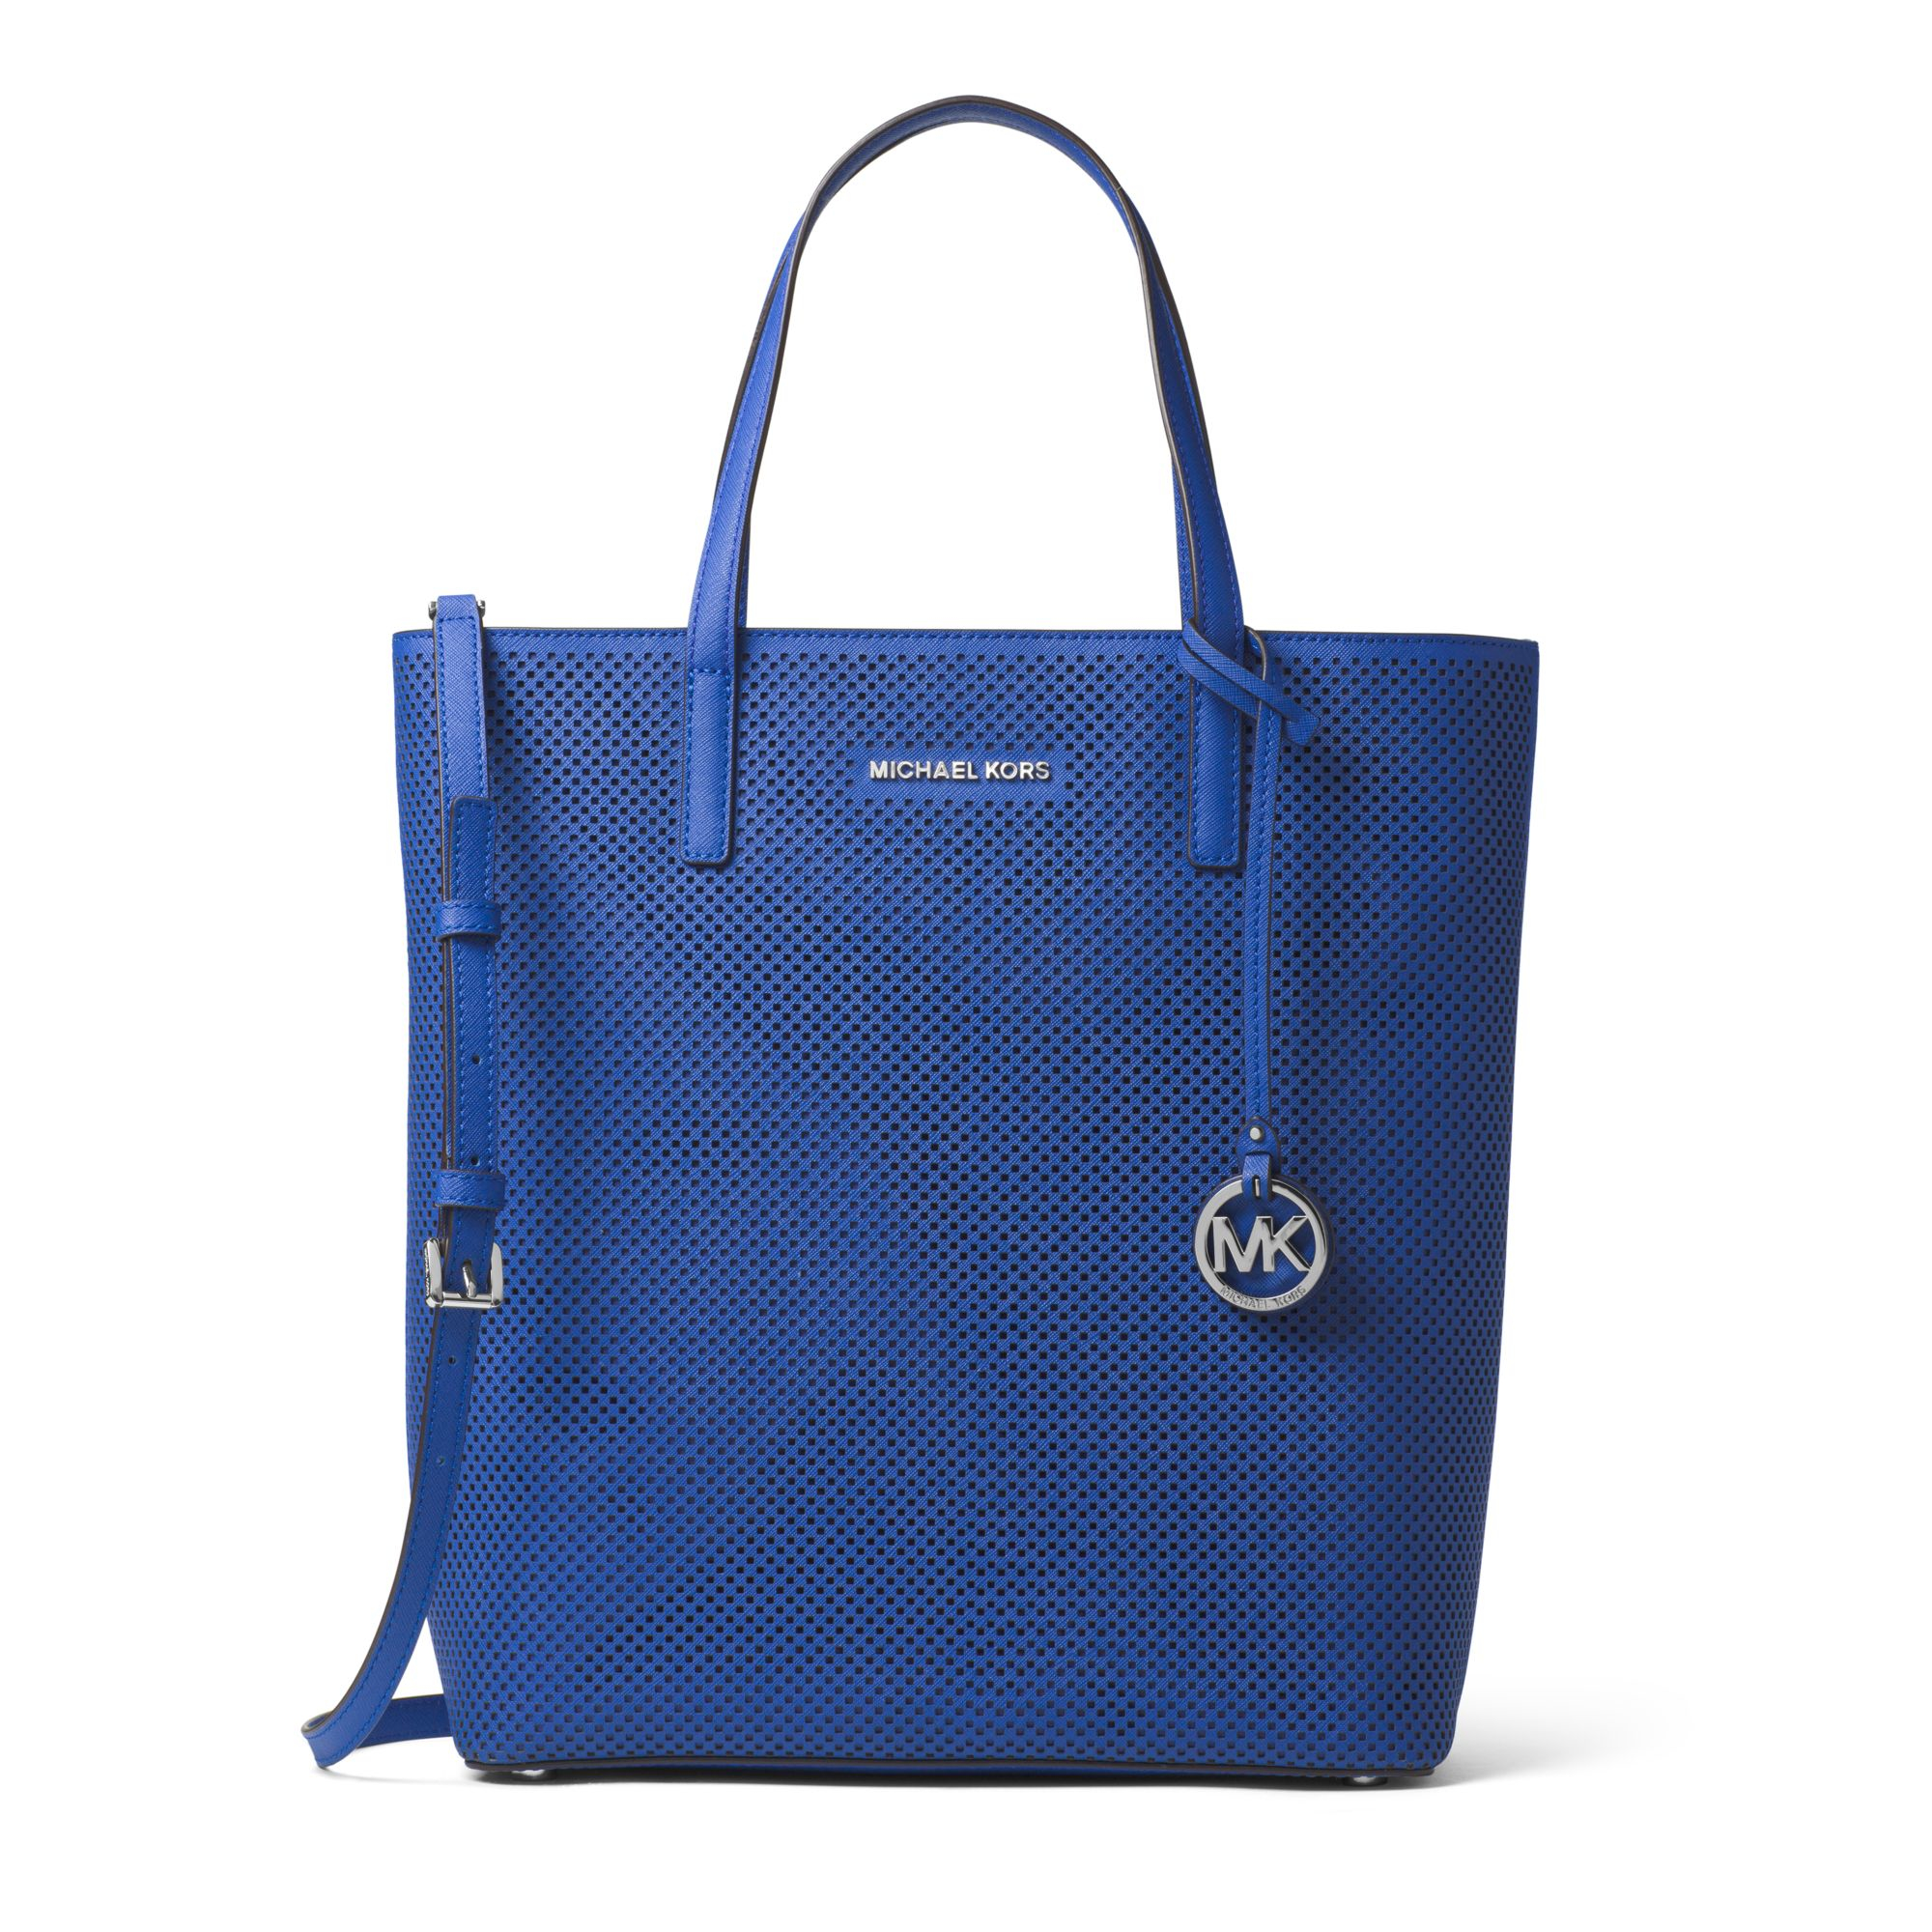 Michael kors Hayley Large Perforated-leather Tote Bag in Blue | Lyst